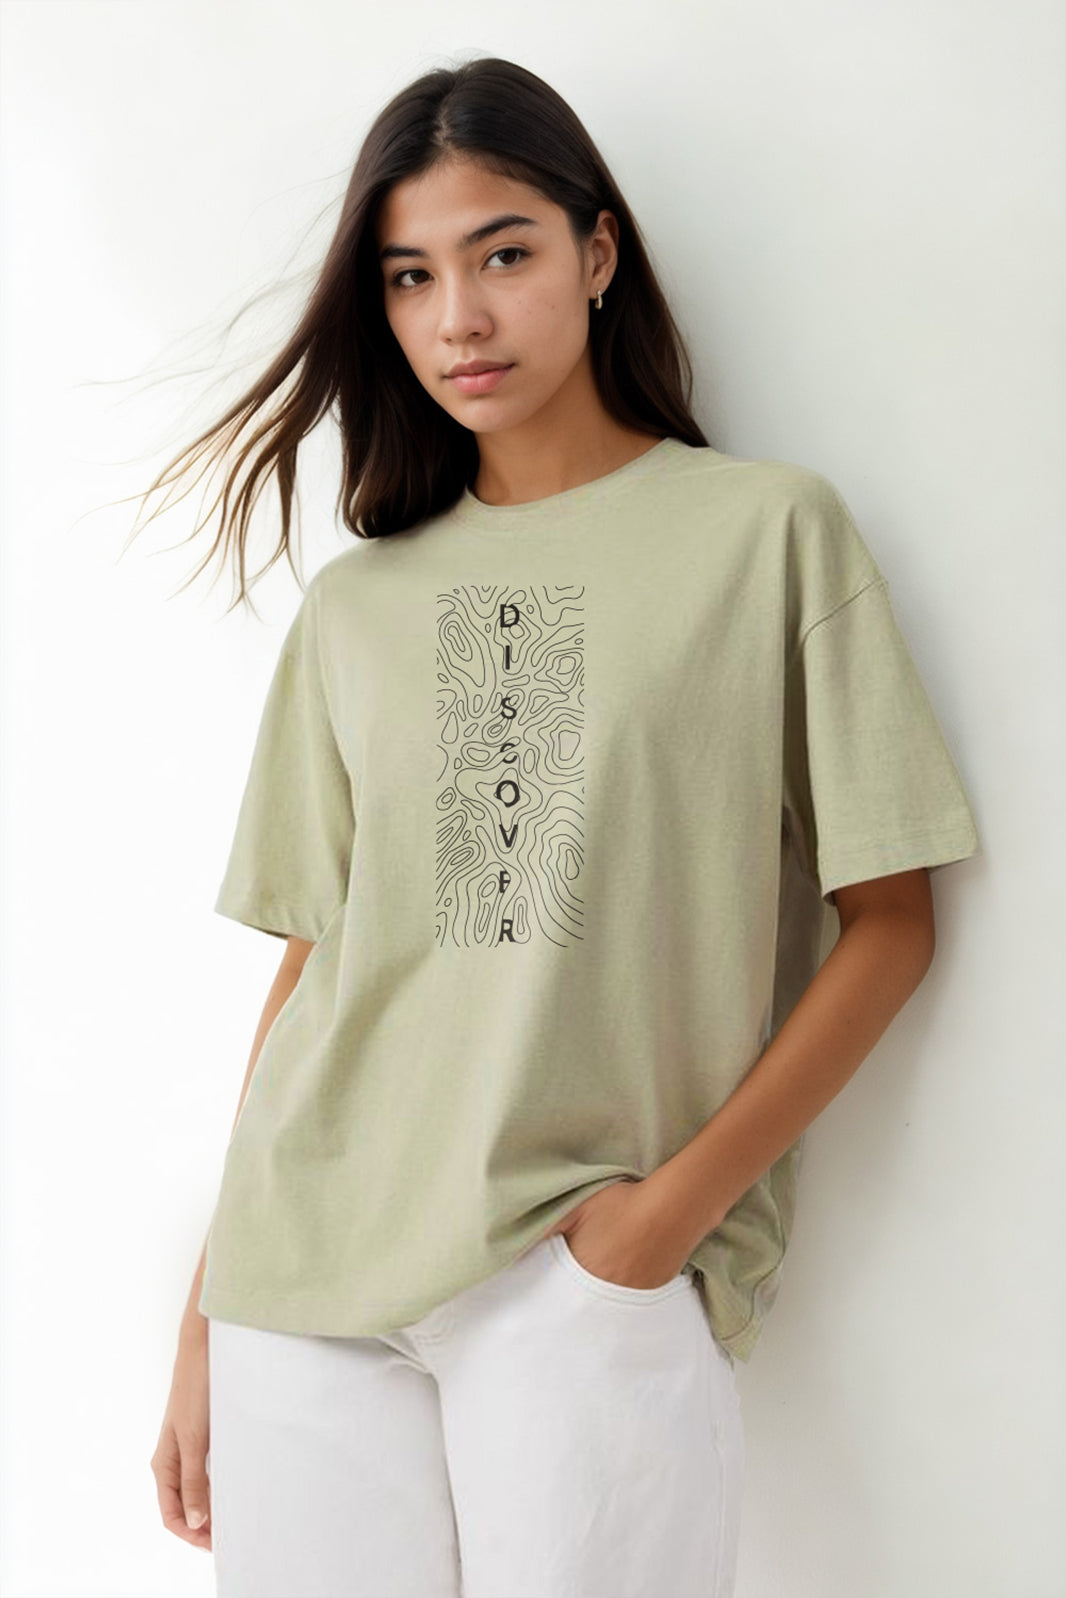 Discover Oversized T-Shirt